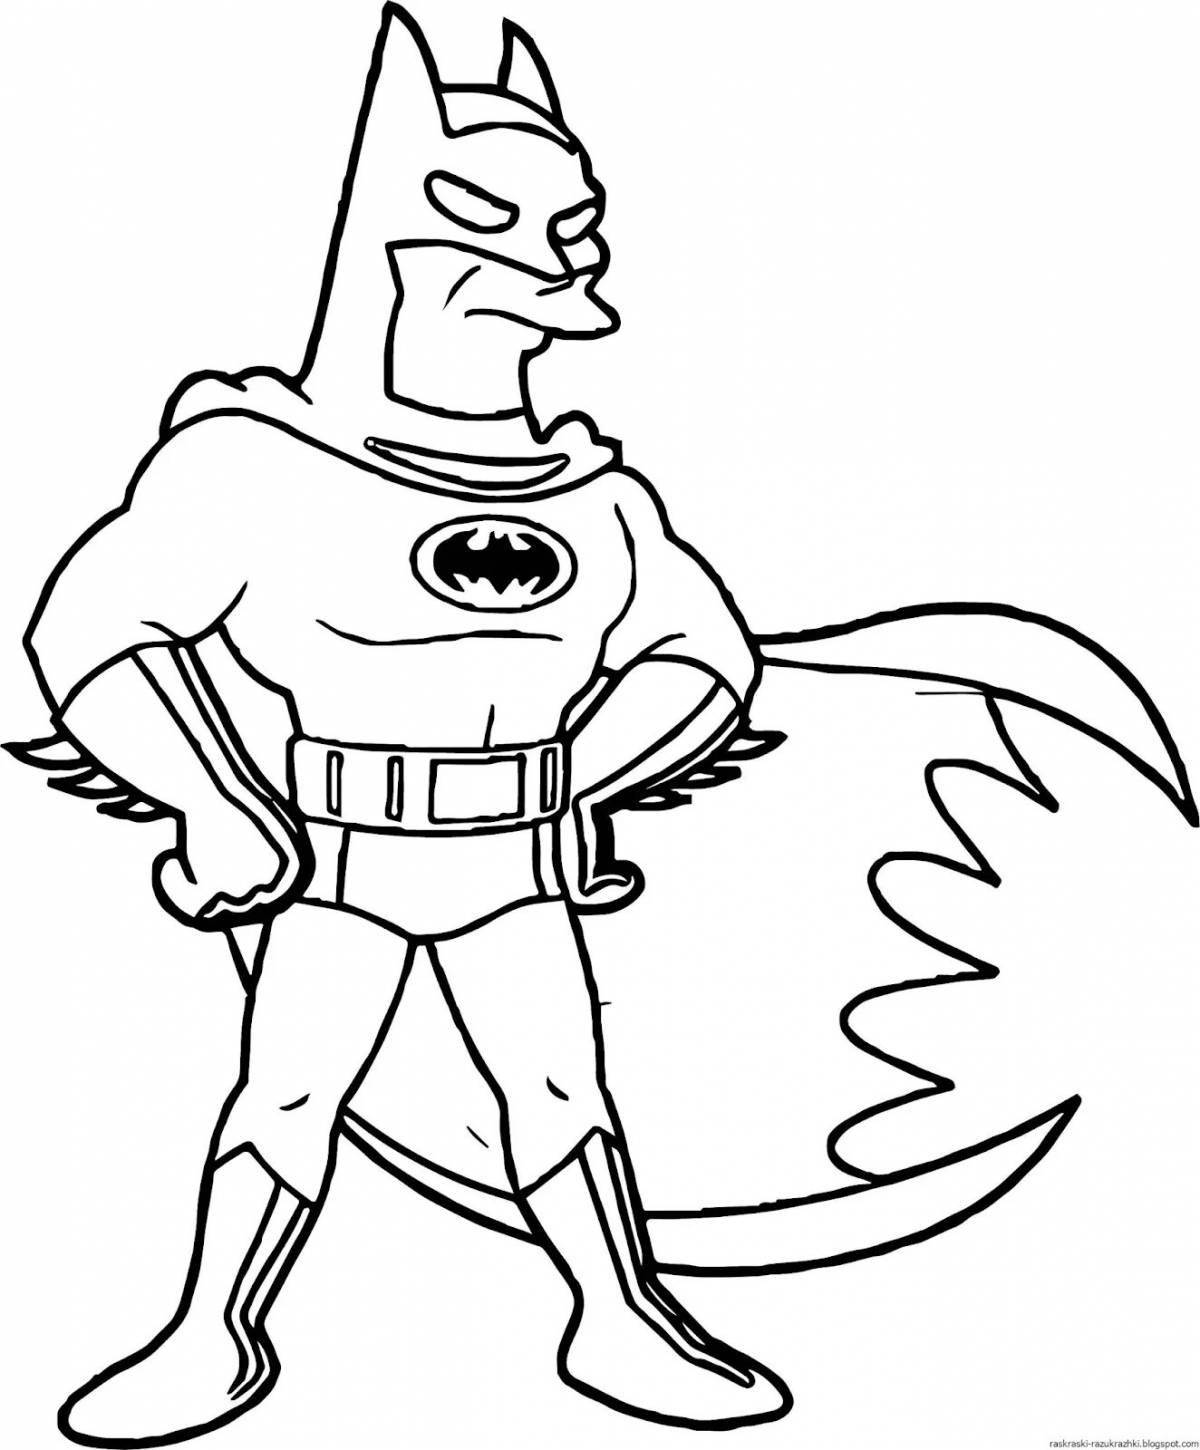 Great superhero coloring pages for kids 5-6 years old